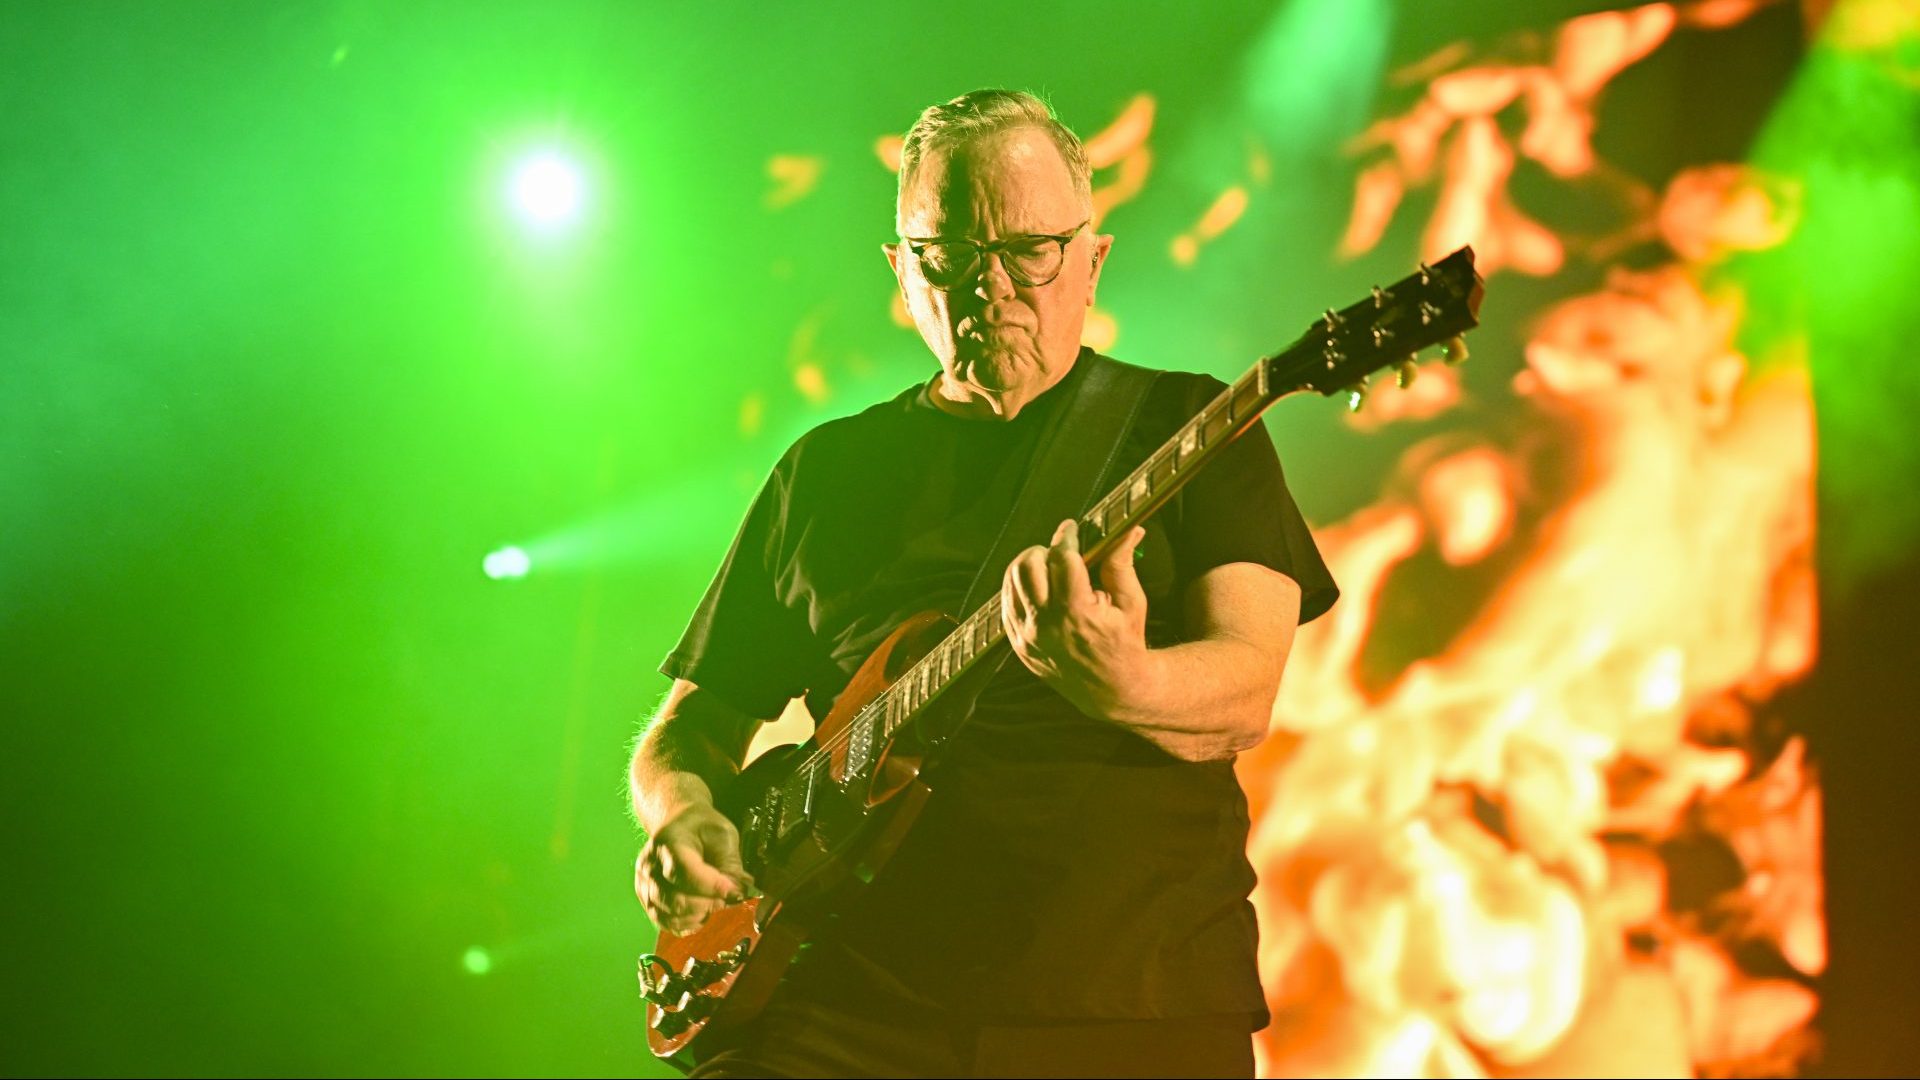 Bernard Sumner of New Order performs at London's O2 Arena in September 2023 (Photo by Jack Hall/Getty Images)